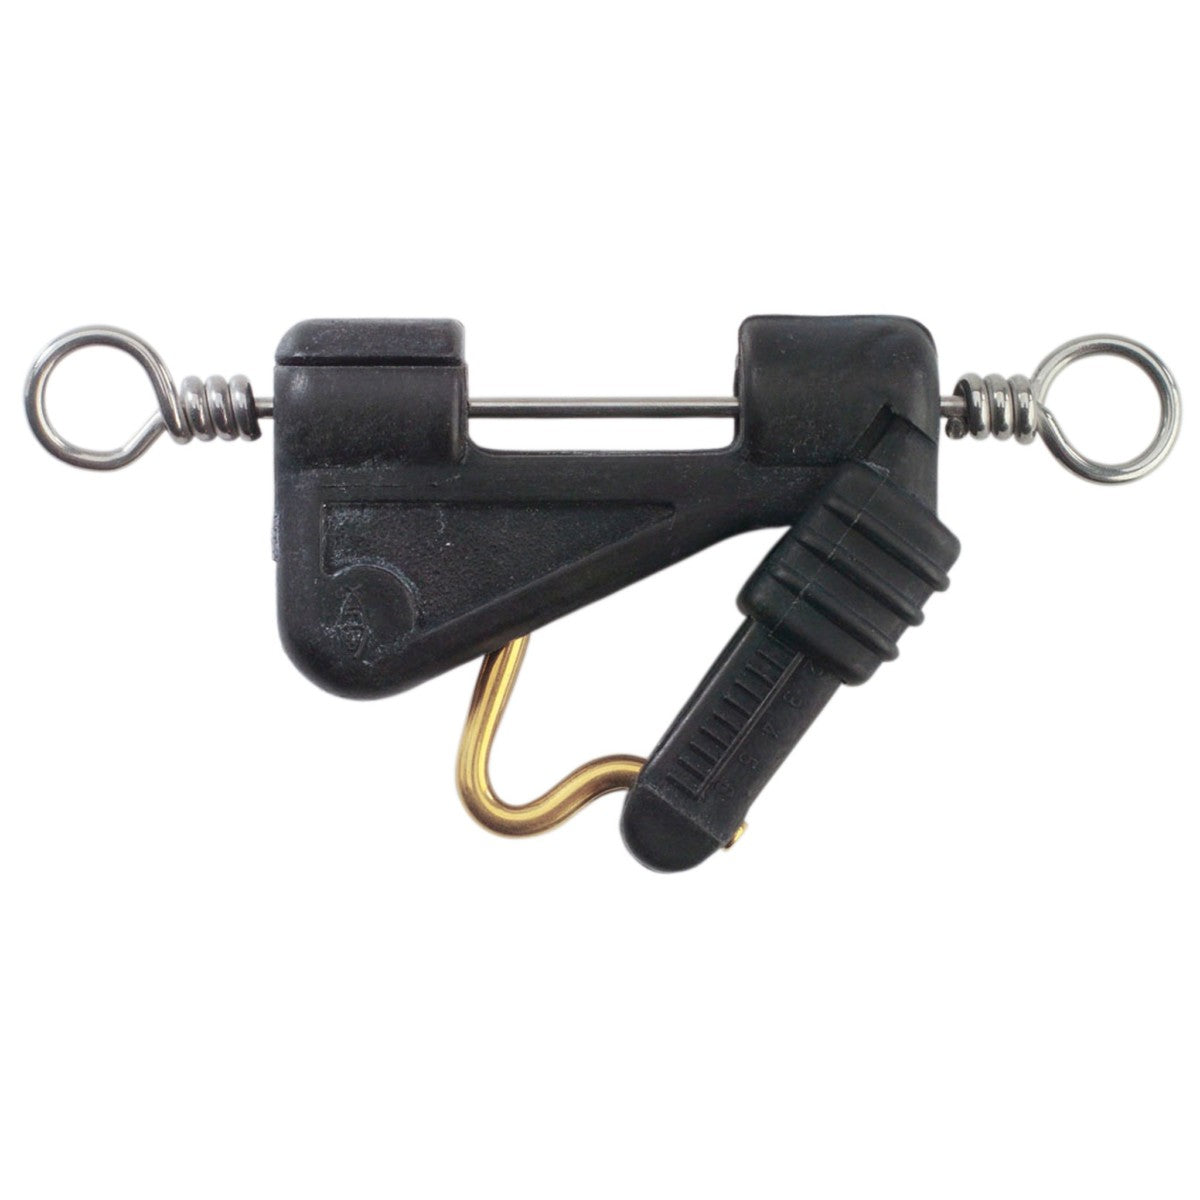 AFTCO Goldfinger Outrigger Clip OC1-Accessories - Game Fishing-AFTCO-Fishing Station